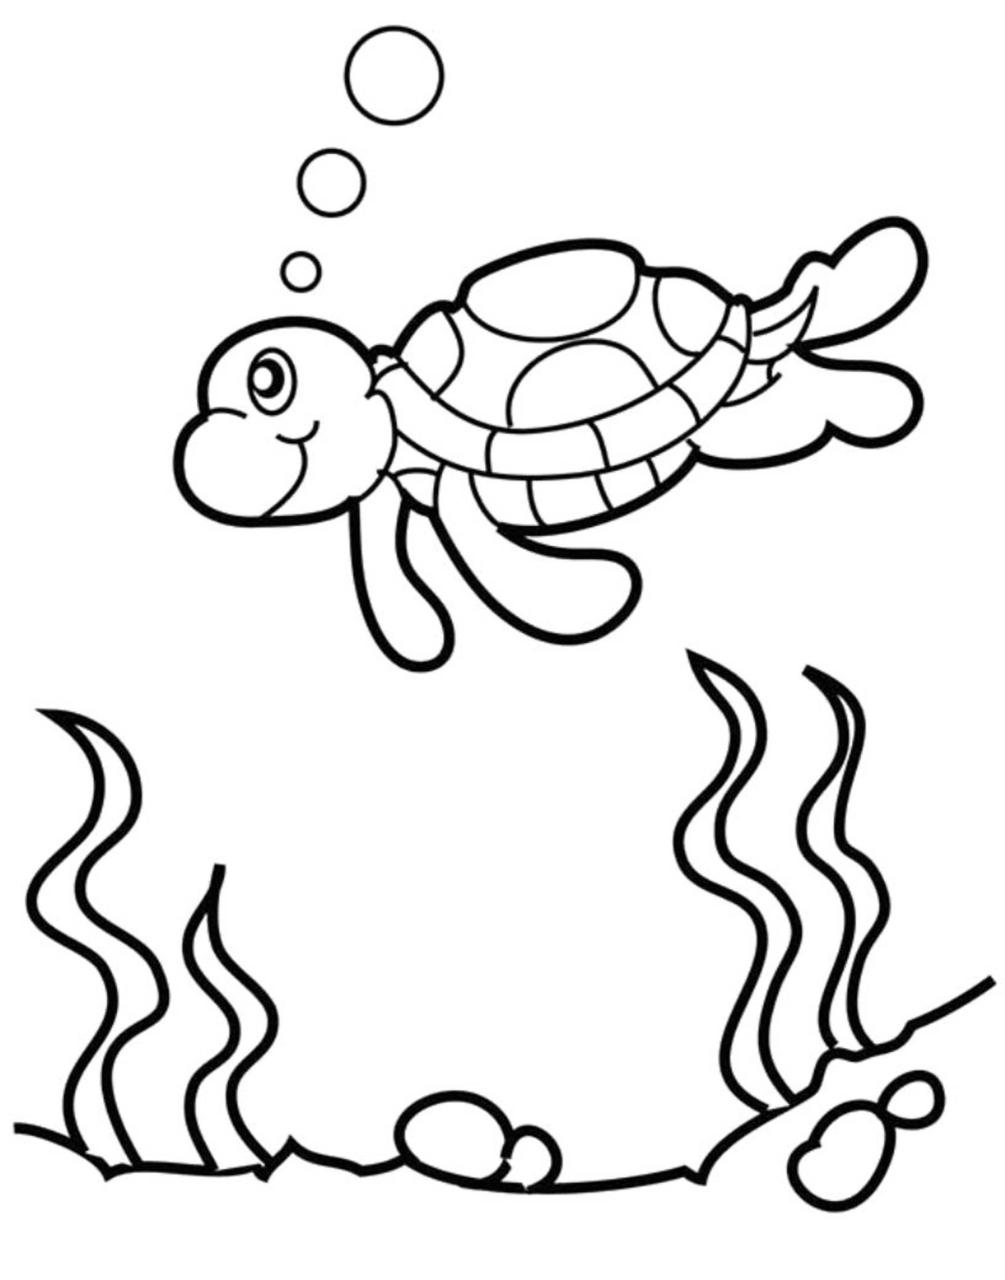 Turtle Parking Coloring Page Turtle coloring pages